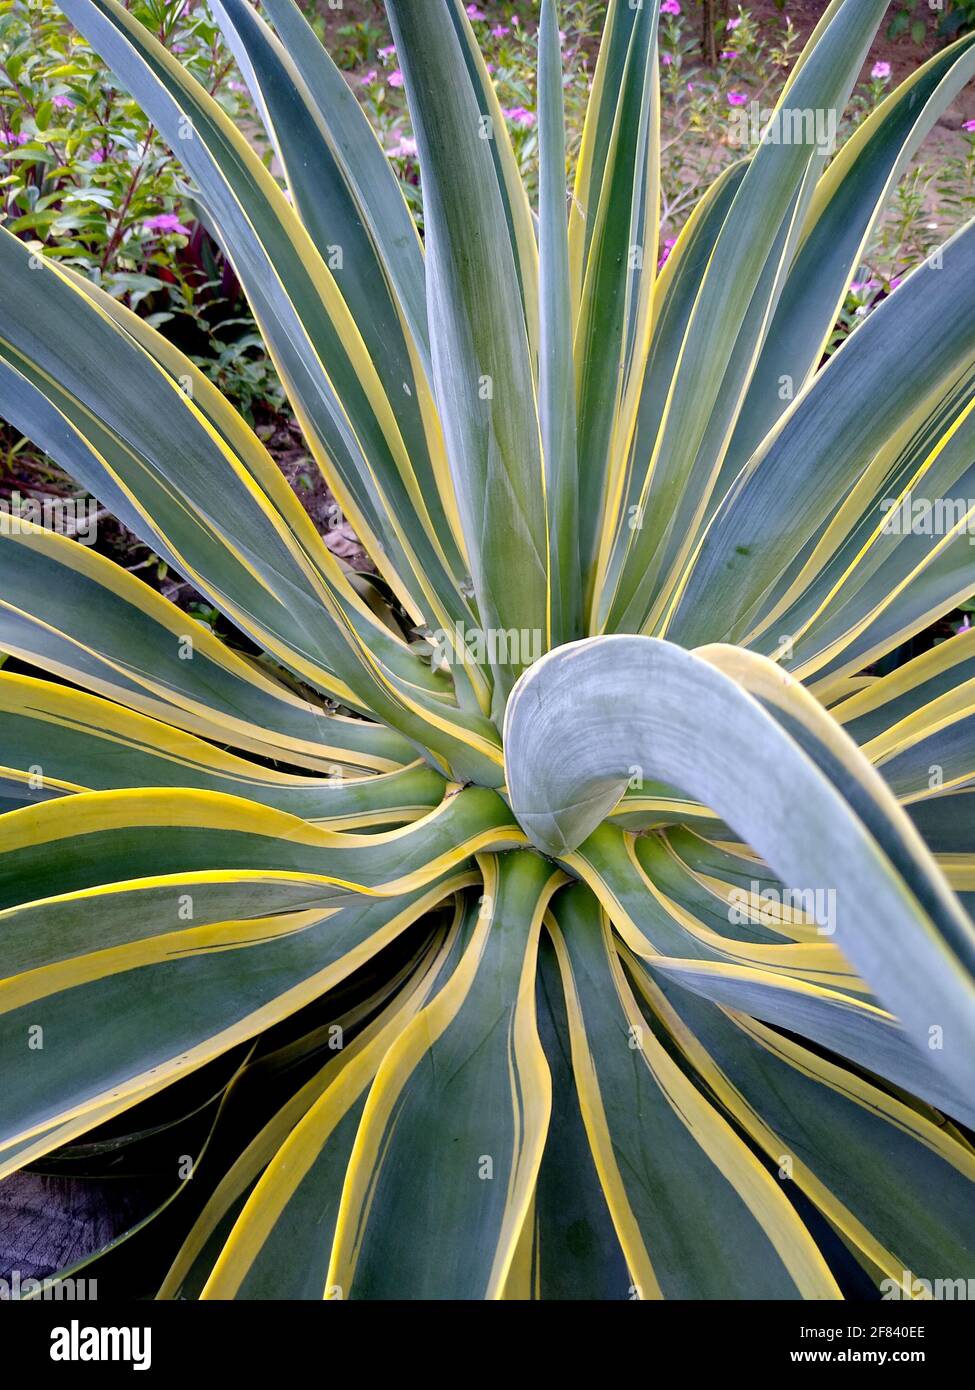 salvador, bahia / brazil - november 23, 2020: american agave plant is seen in the garden of a residence in the city of Salvador. Stock Photo